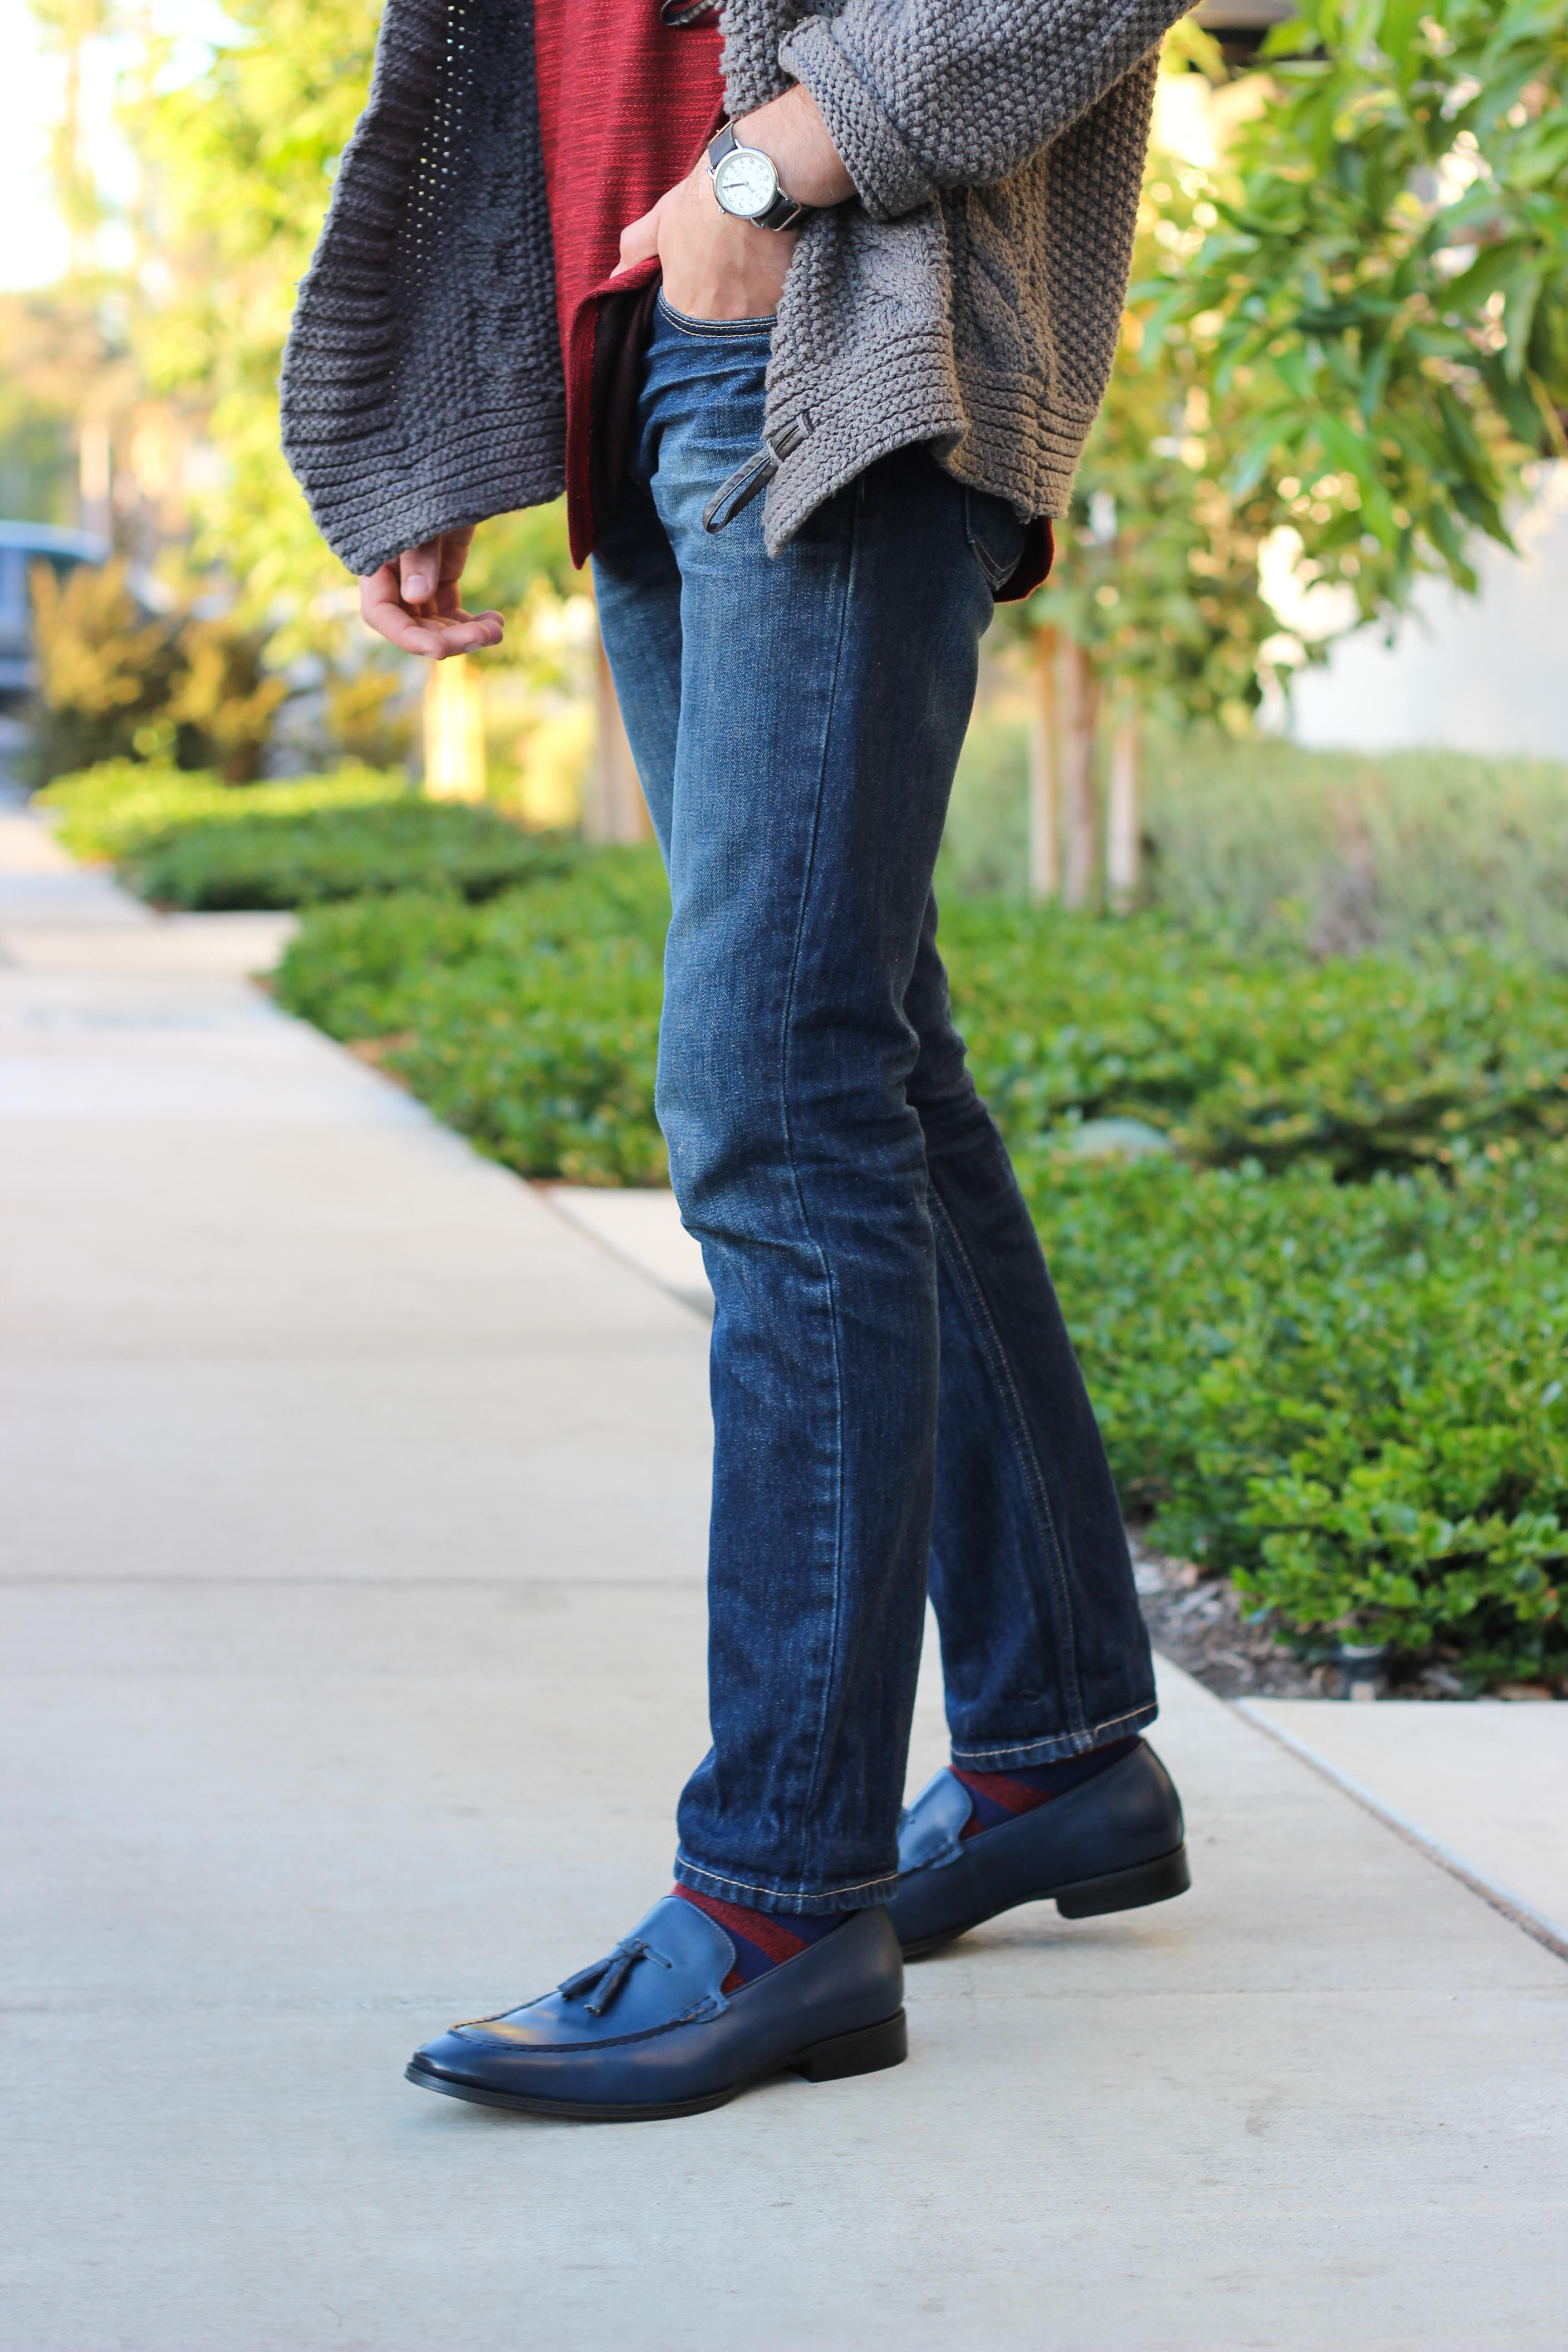 dress casual shoes with jeans